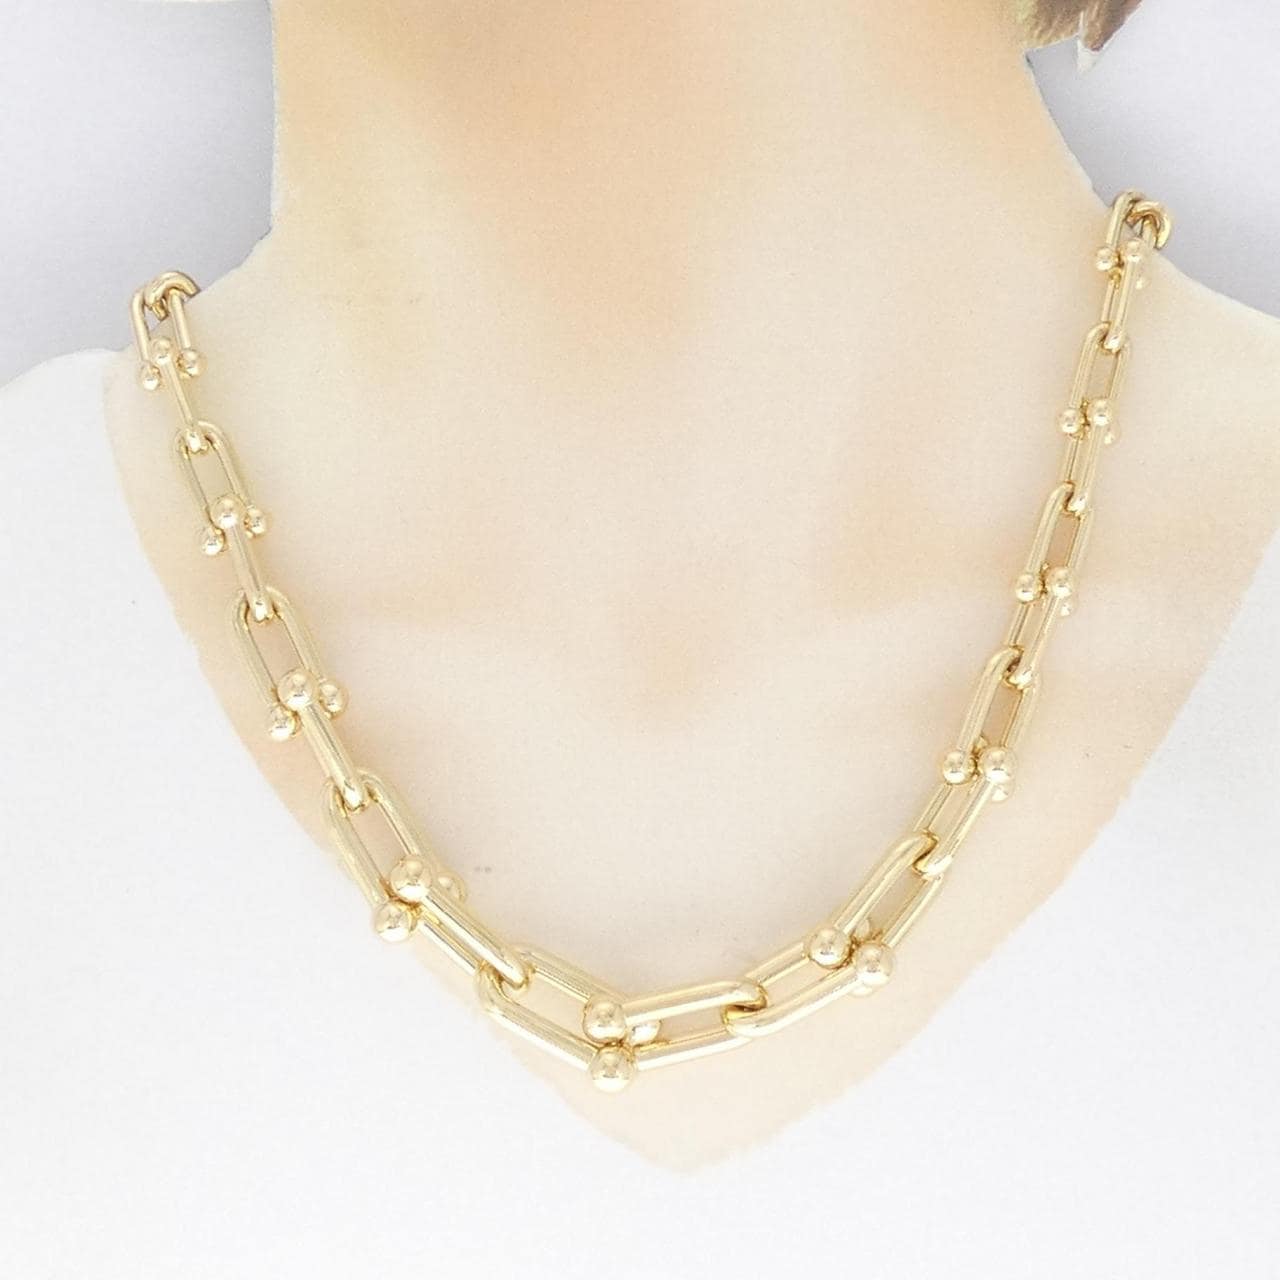 [BRAND NEW] TIFFANY Graduated Link Necklace